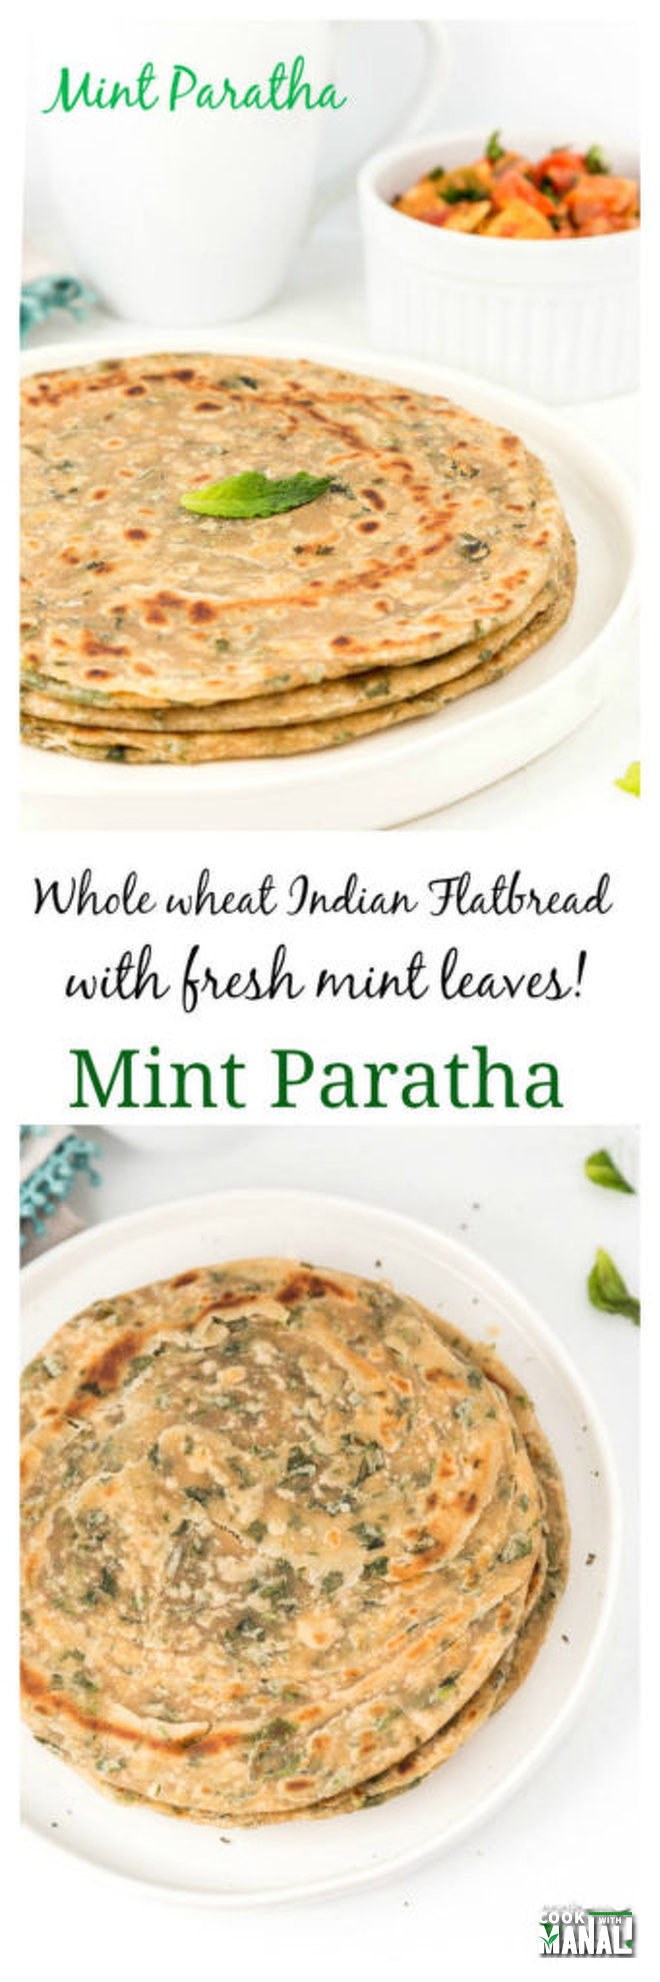 Mint Paratha - Cook With Manali